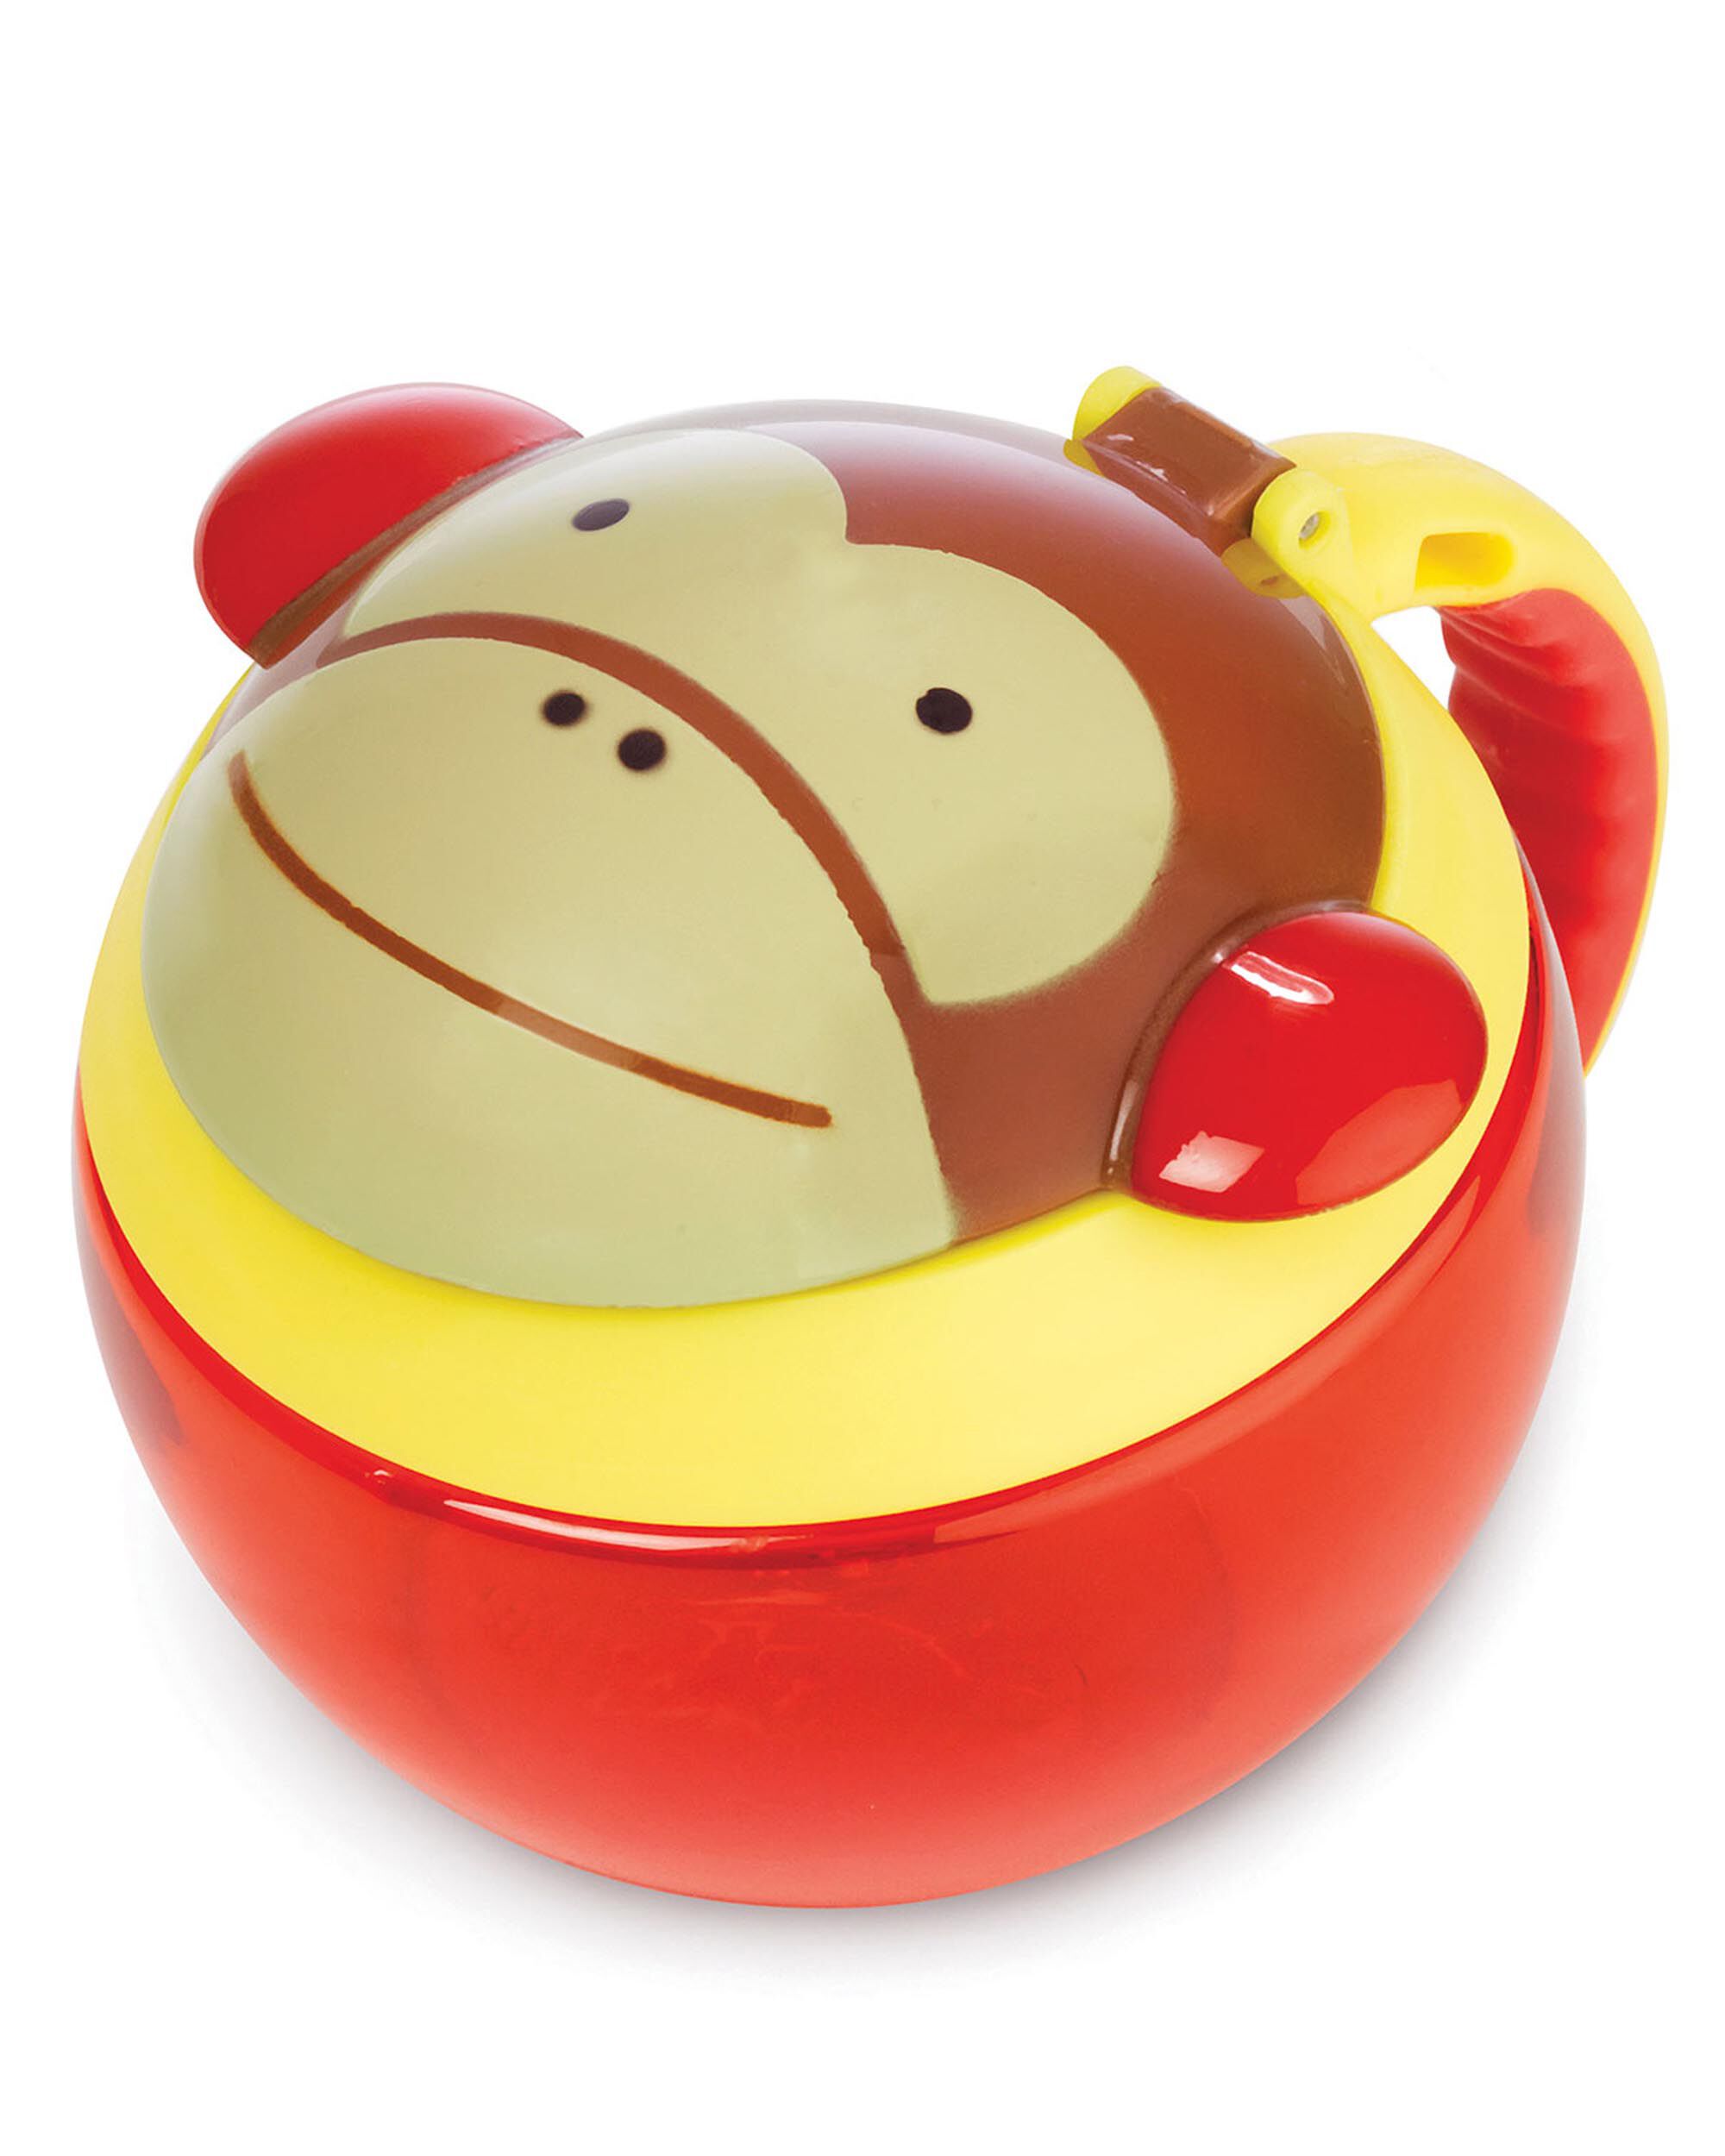 Skip Hop ZOO SNACK CUP MONKEY Baby Feeding Cups Dishes Utensils BN 